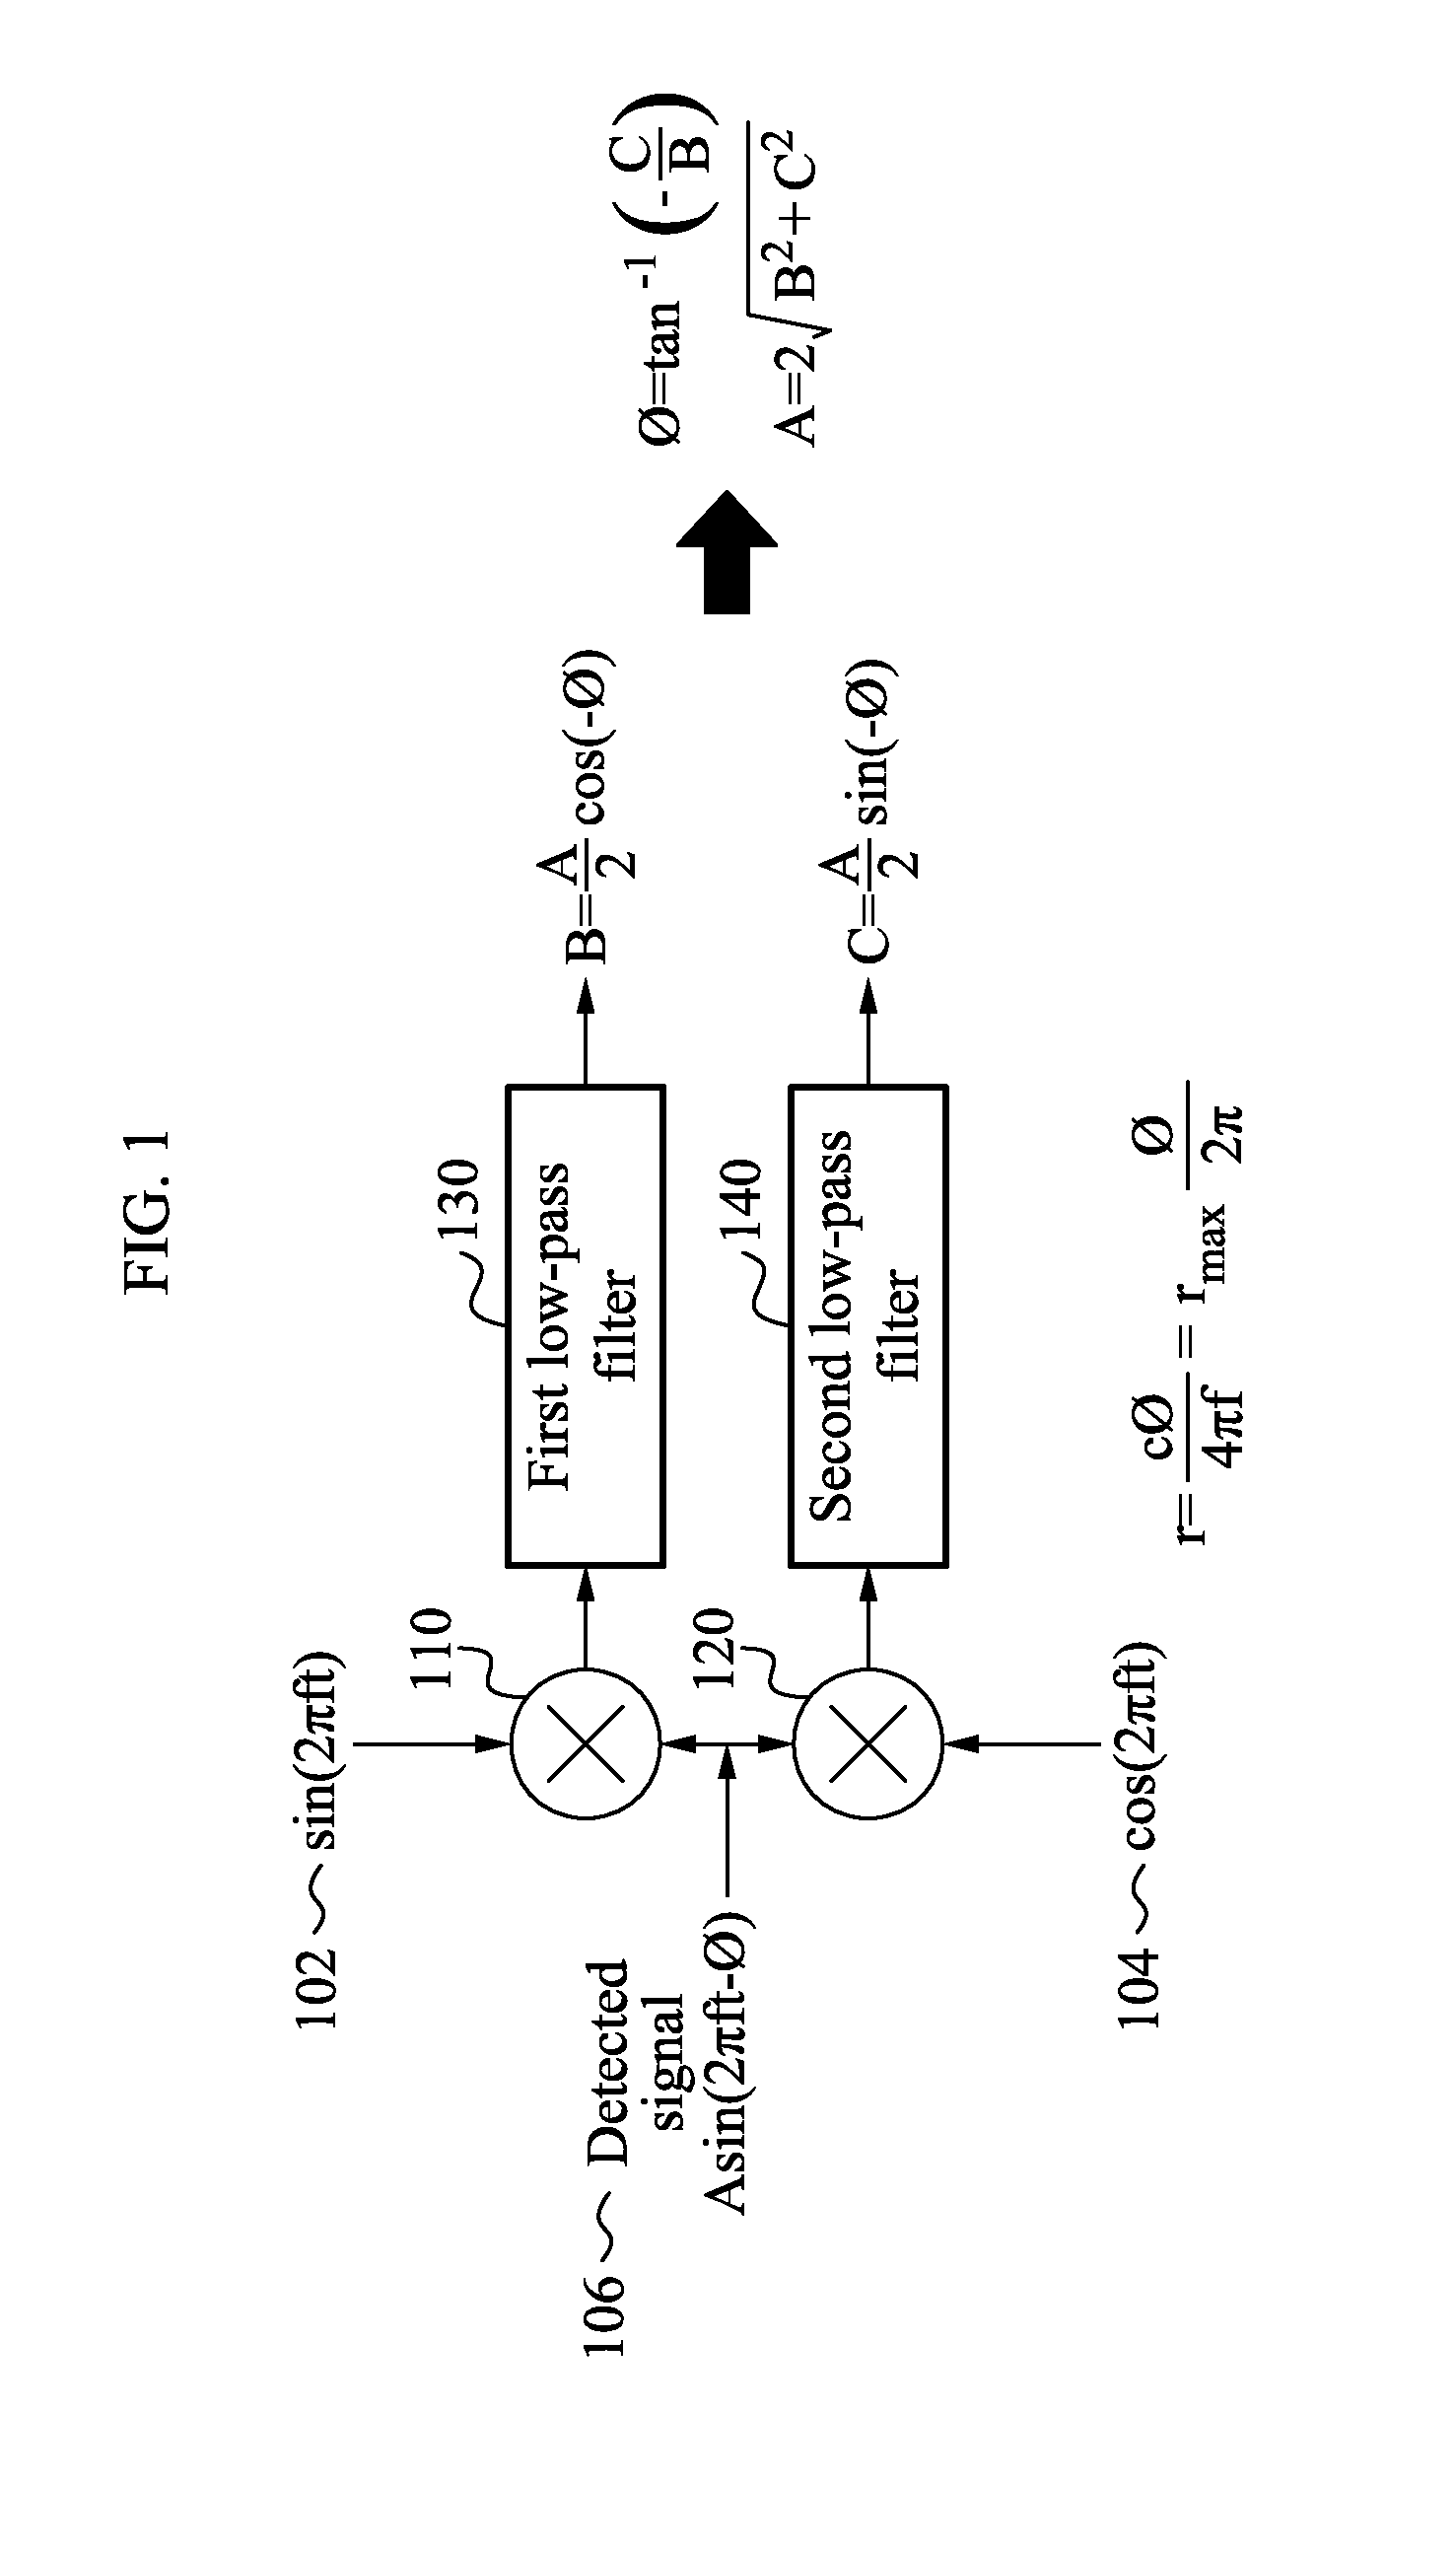 Synthesis system of time-of-flight camera and stereo camera for reliable wide range depth acquisition and method therefor